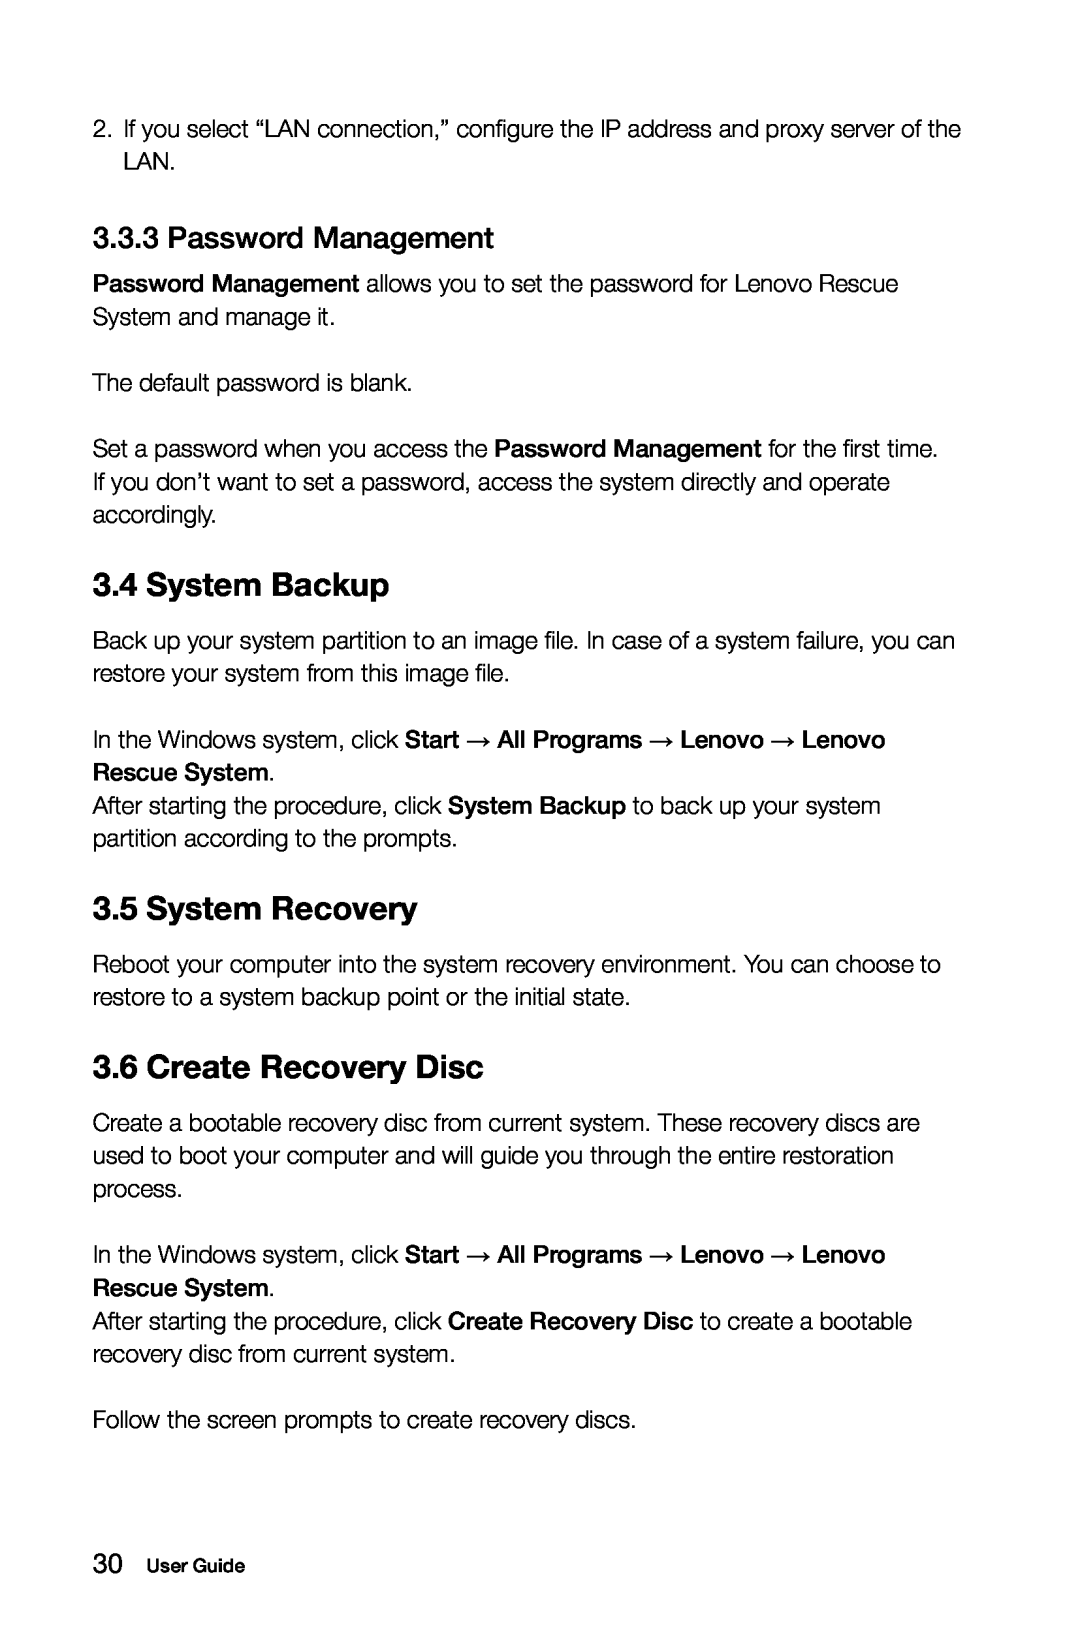 Lenovo 10052, B3, 10051 manual System Backup, System Recovery, Create Recovery Disc, Password Management 